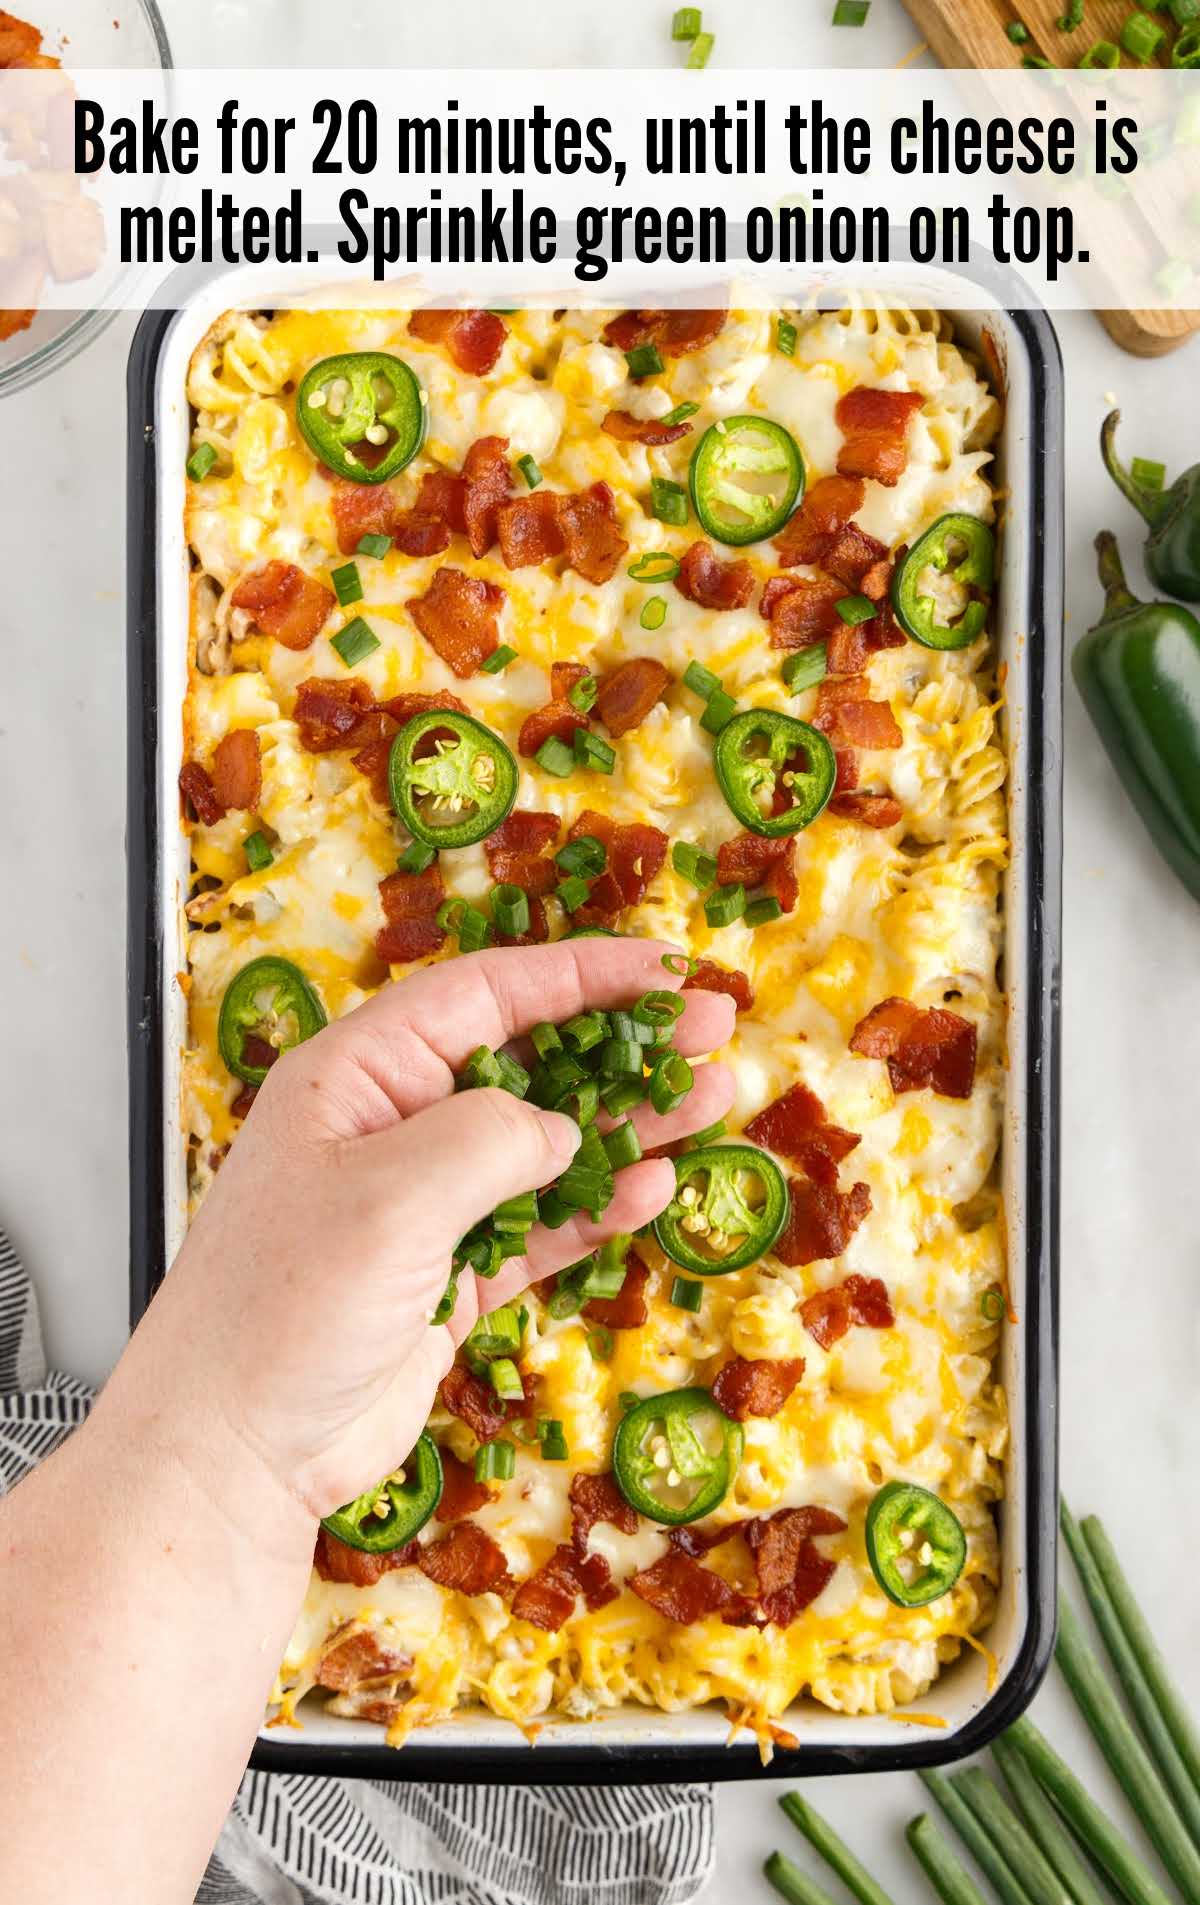 A pizza sitting on top of a tray of food, with Chicken and Pasta